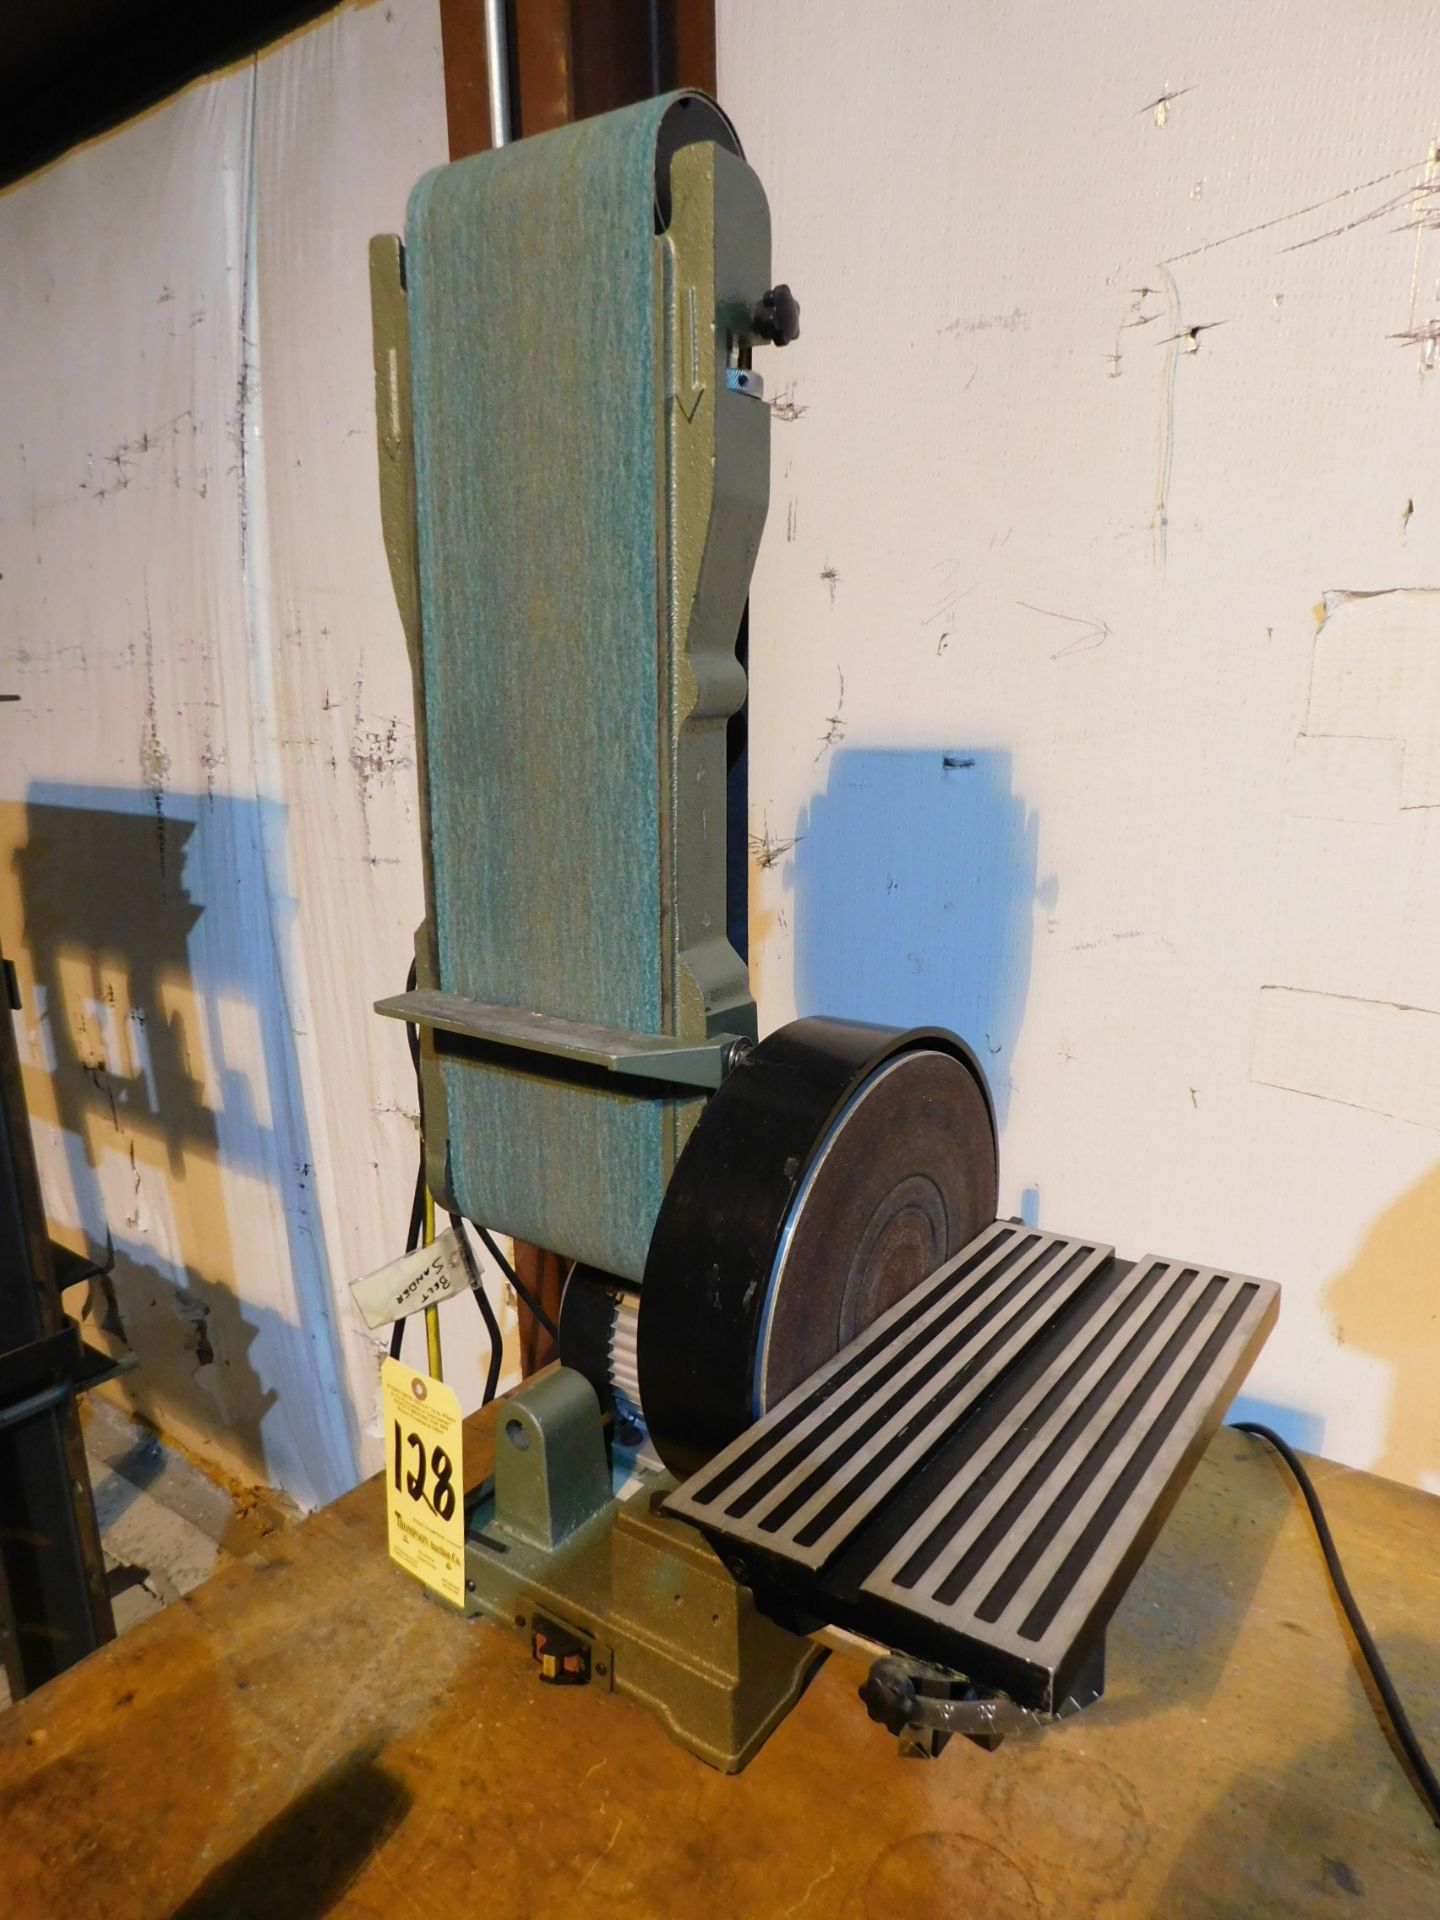 Central Machinery 6" Belt/9" Disc Sander, 115V, 1 phase, Lot Location 3204 Olympia Dr. A, Lafayette,